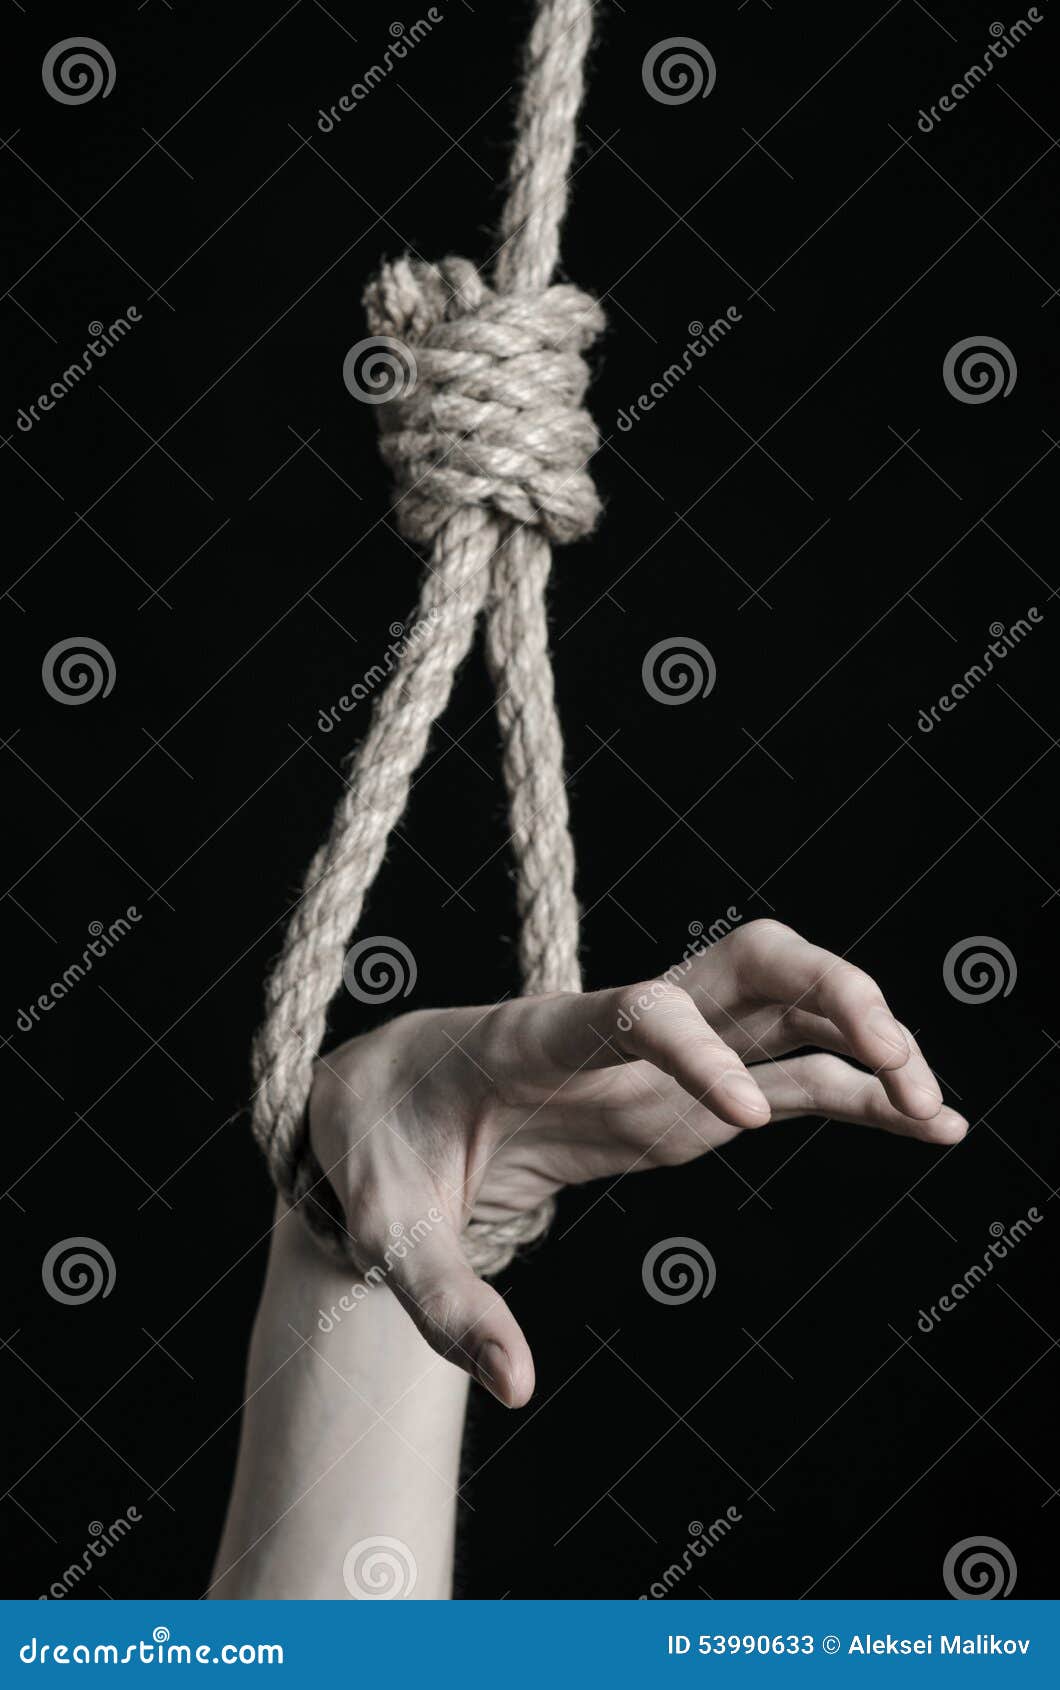 Suicide and Depression Topic: Human Hand Hanging on Rope Loop on a Black  Background Stock Image - Image of black, dead: 53990633